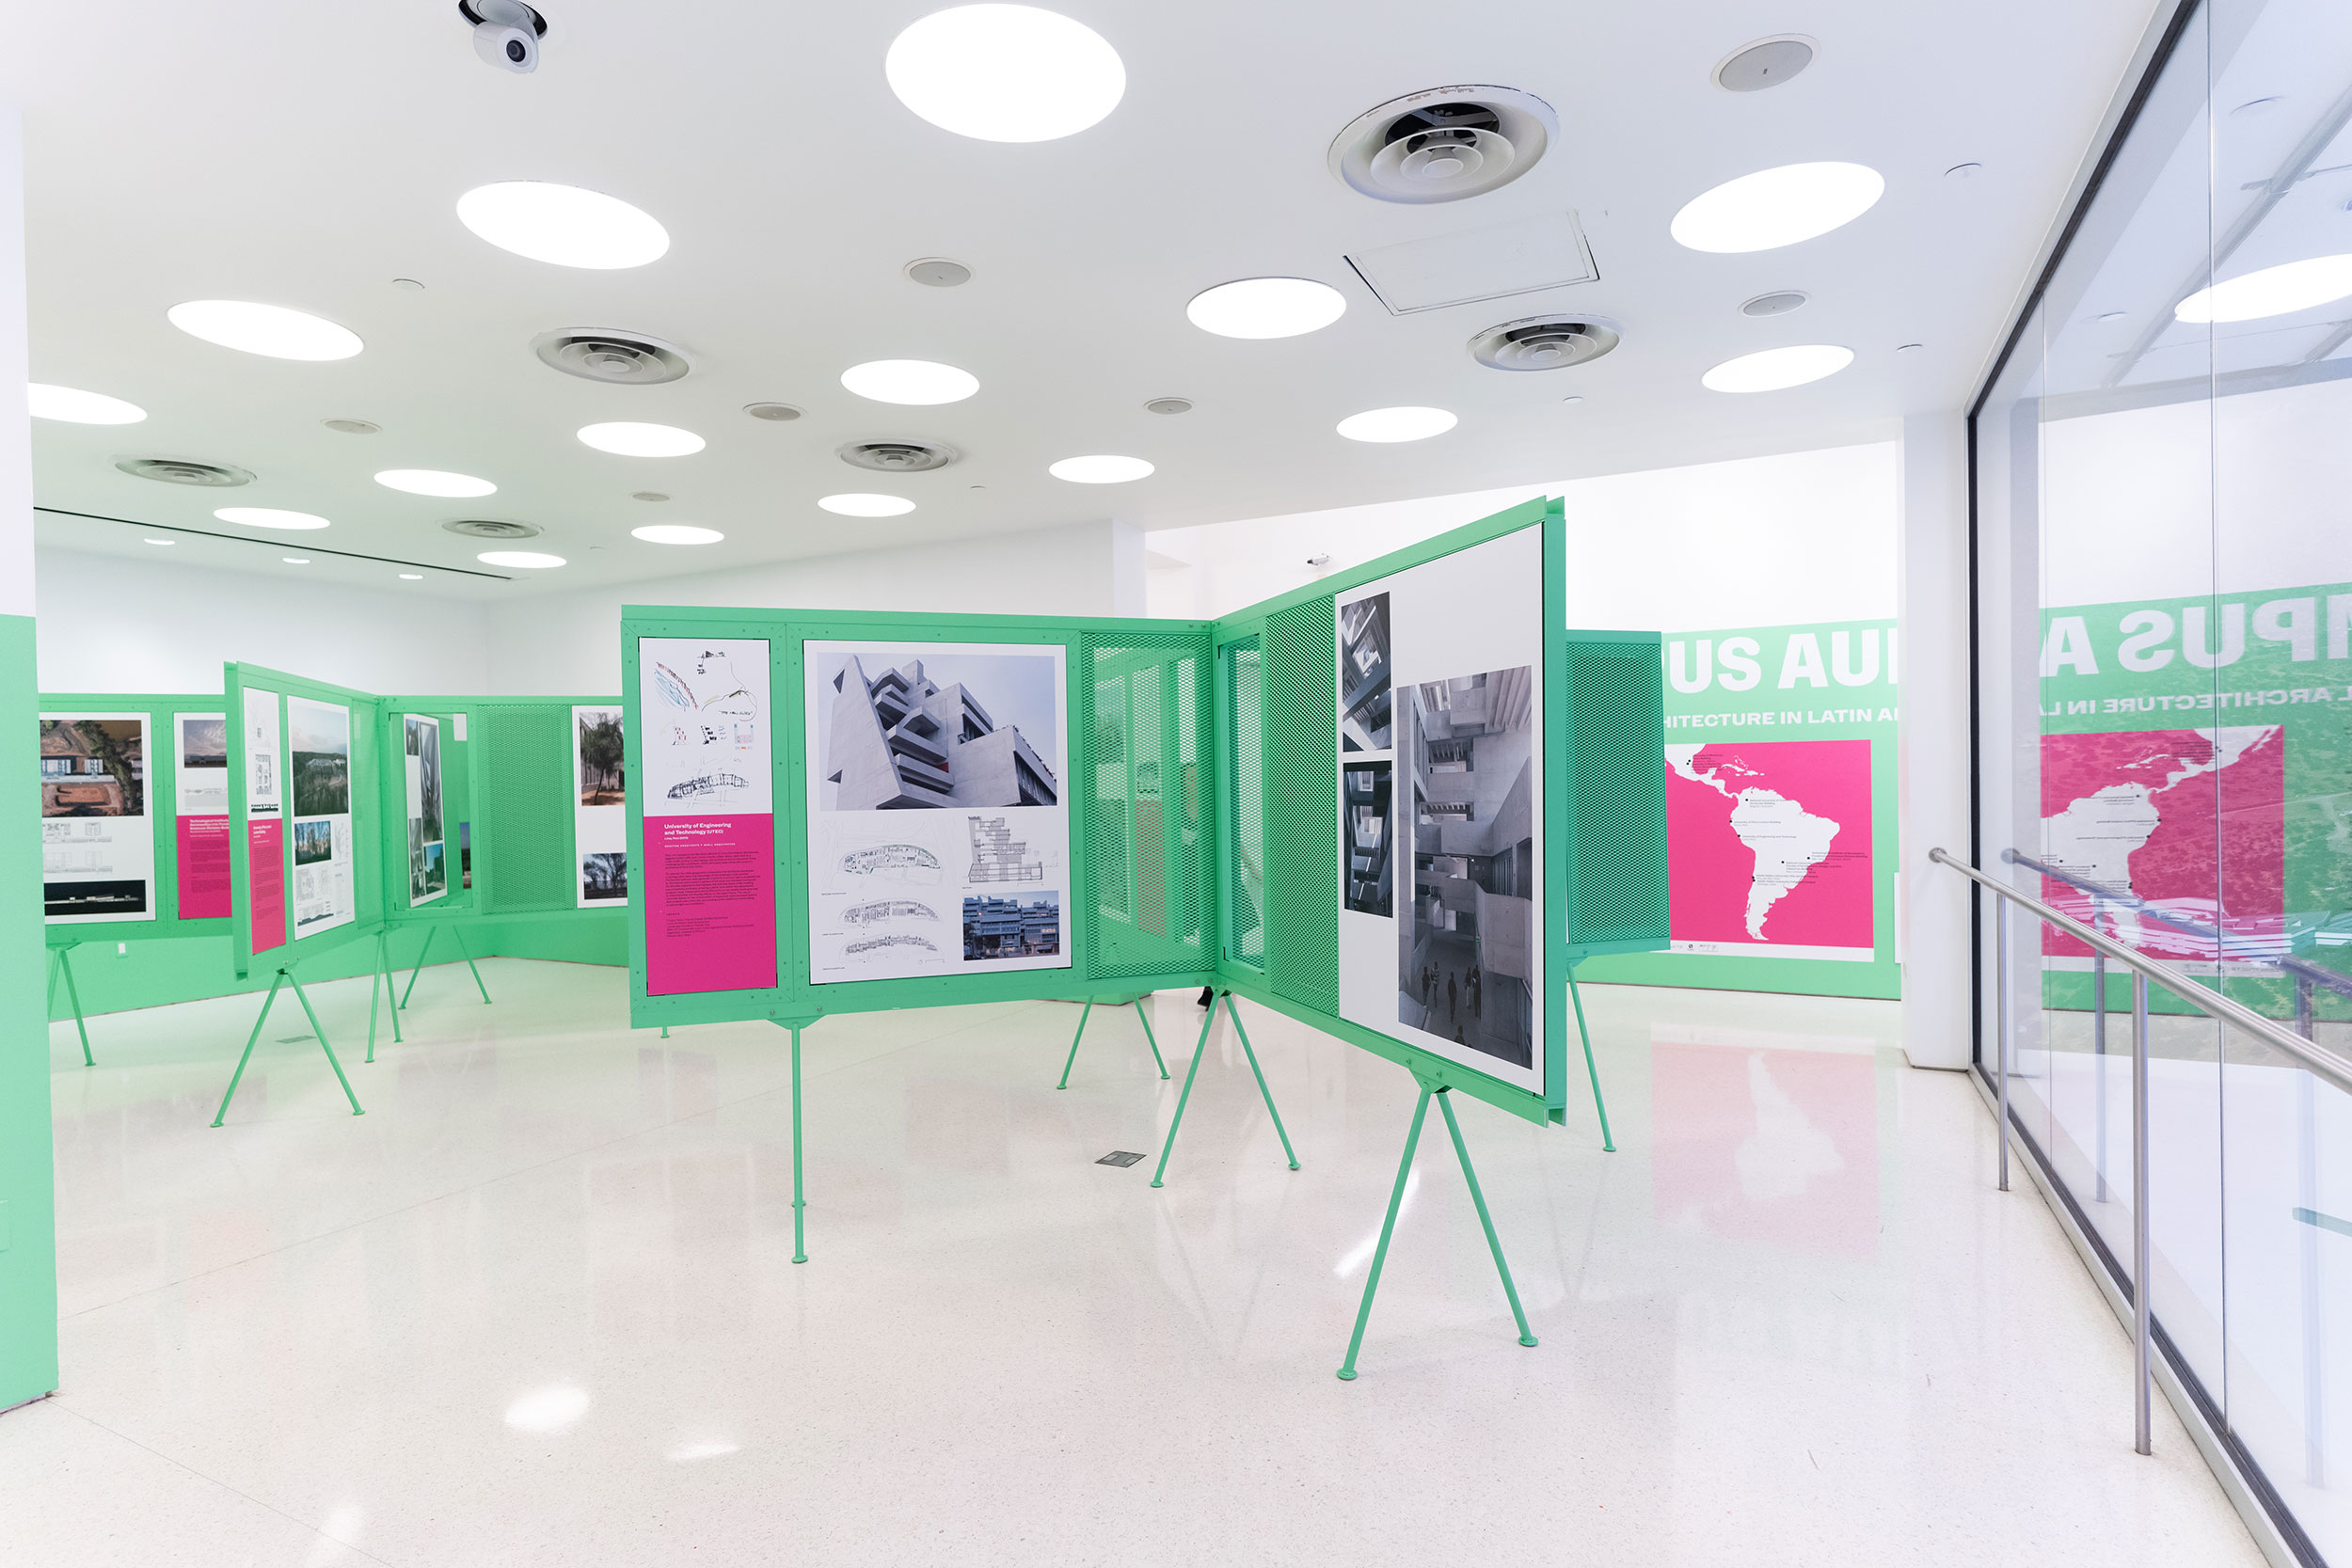 Installation view, CAMPUS AULA: Educational Architecture in Latin America, Center for Architecture, 2023.